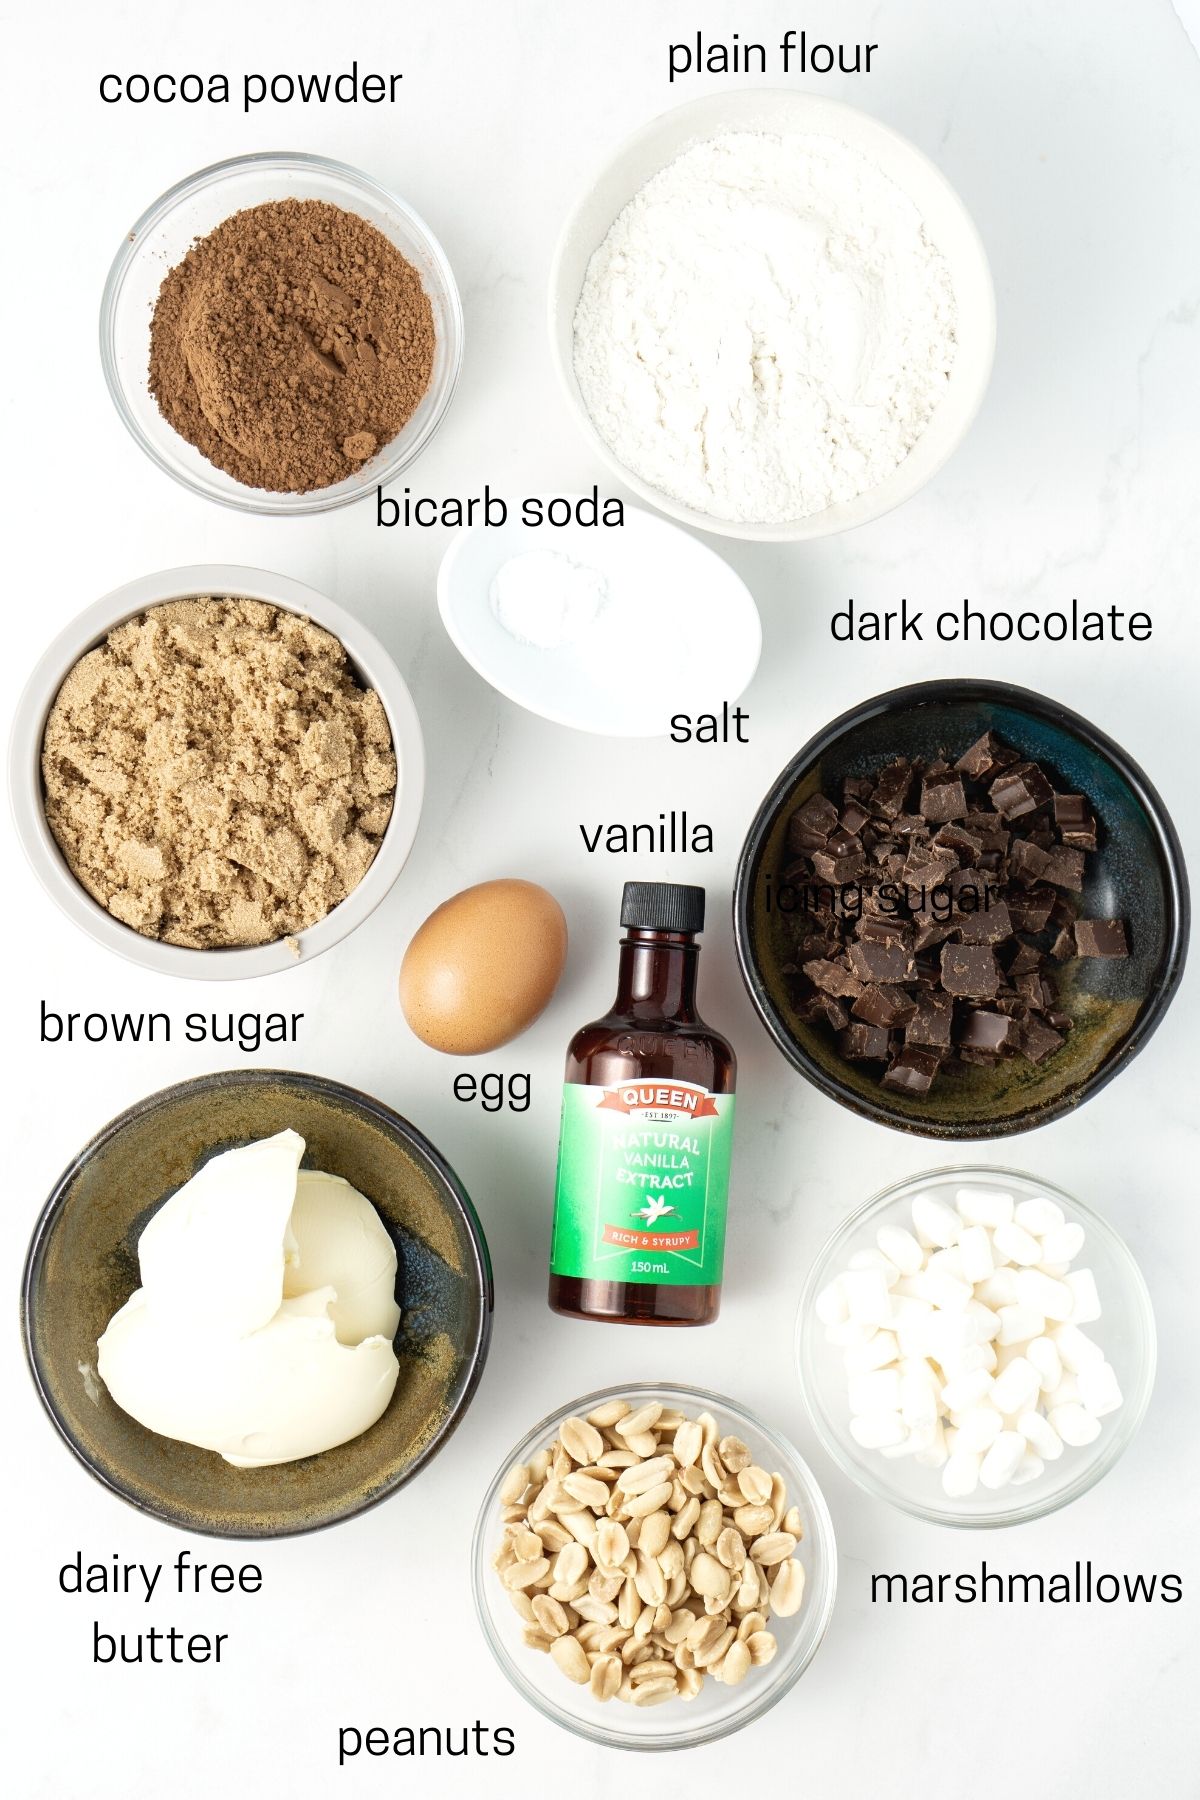 All ingredients needed to make rocky road cookies laid out in small bowls.